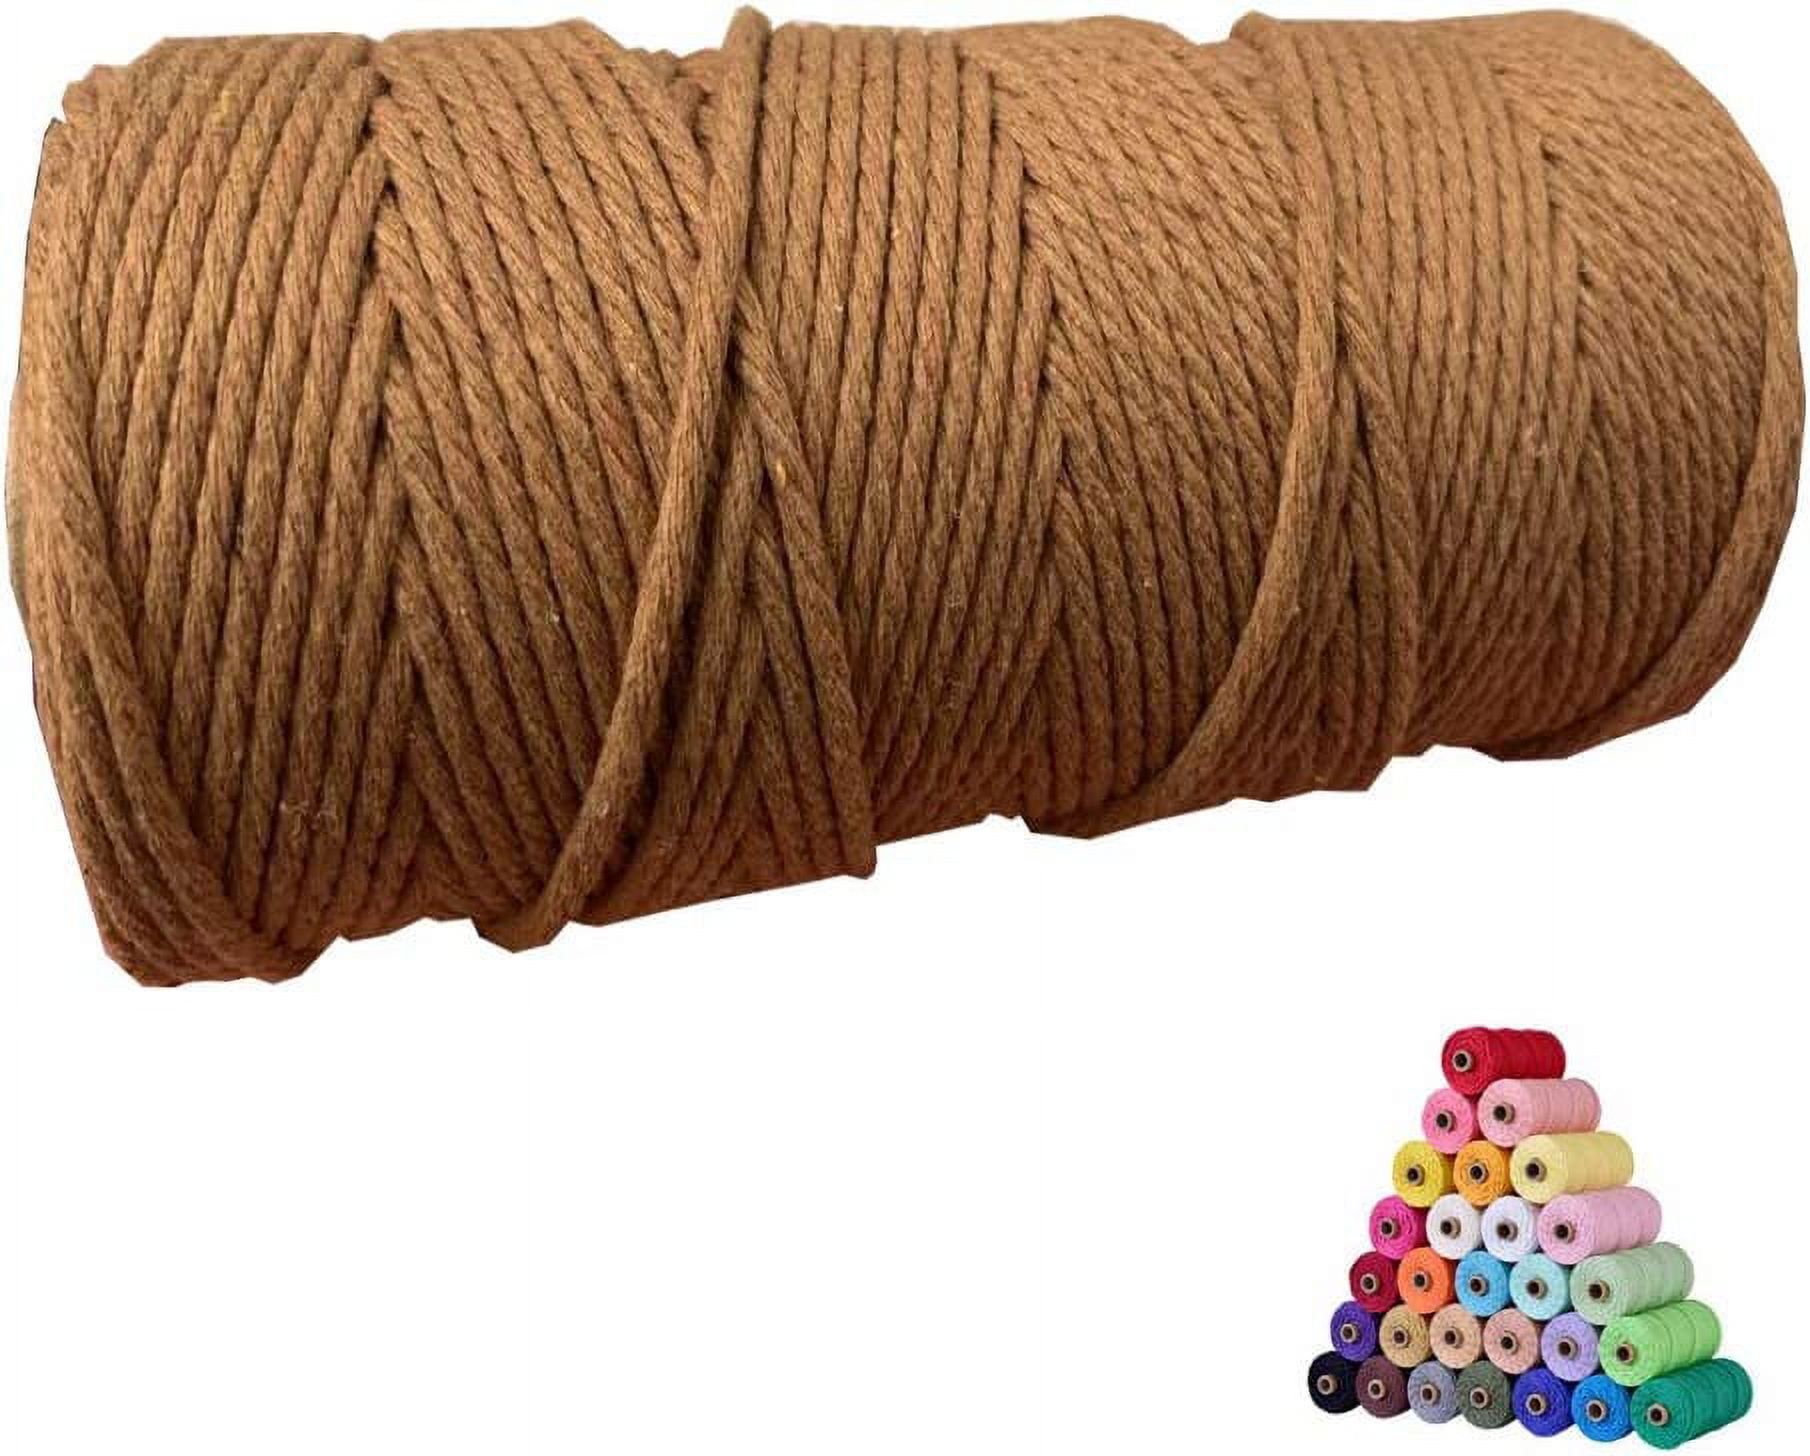 100% 2mm Cotton Cord Colorful Cords Rhombus Twisted Craft String DIY For  Jewelry Making Strings